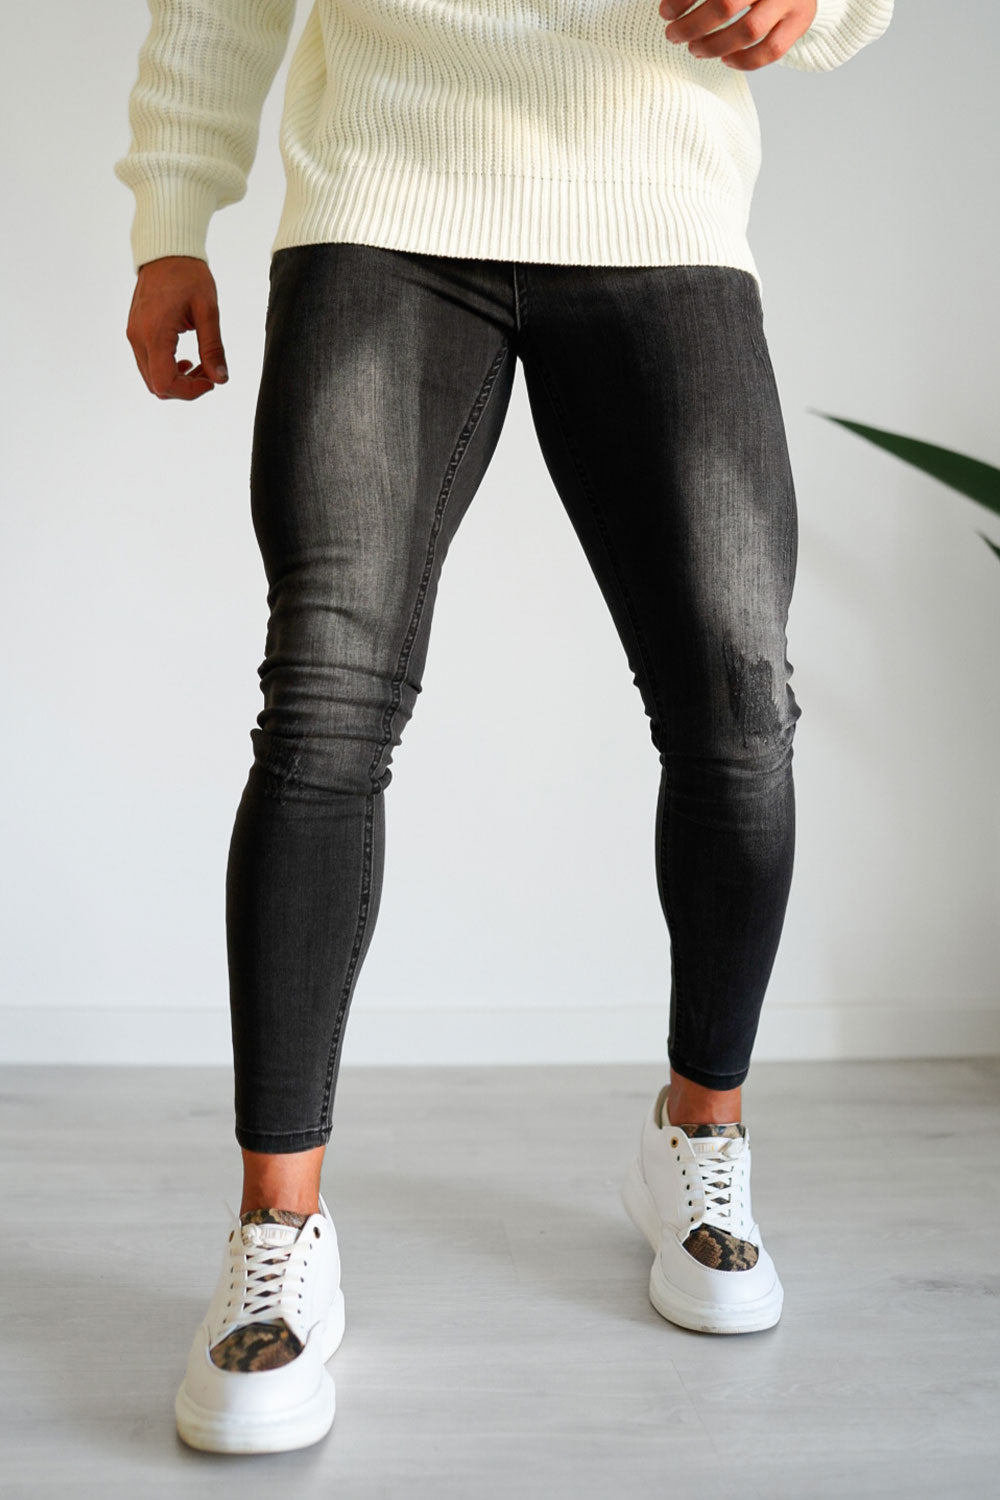 black and gray gradient jeans